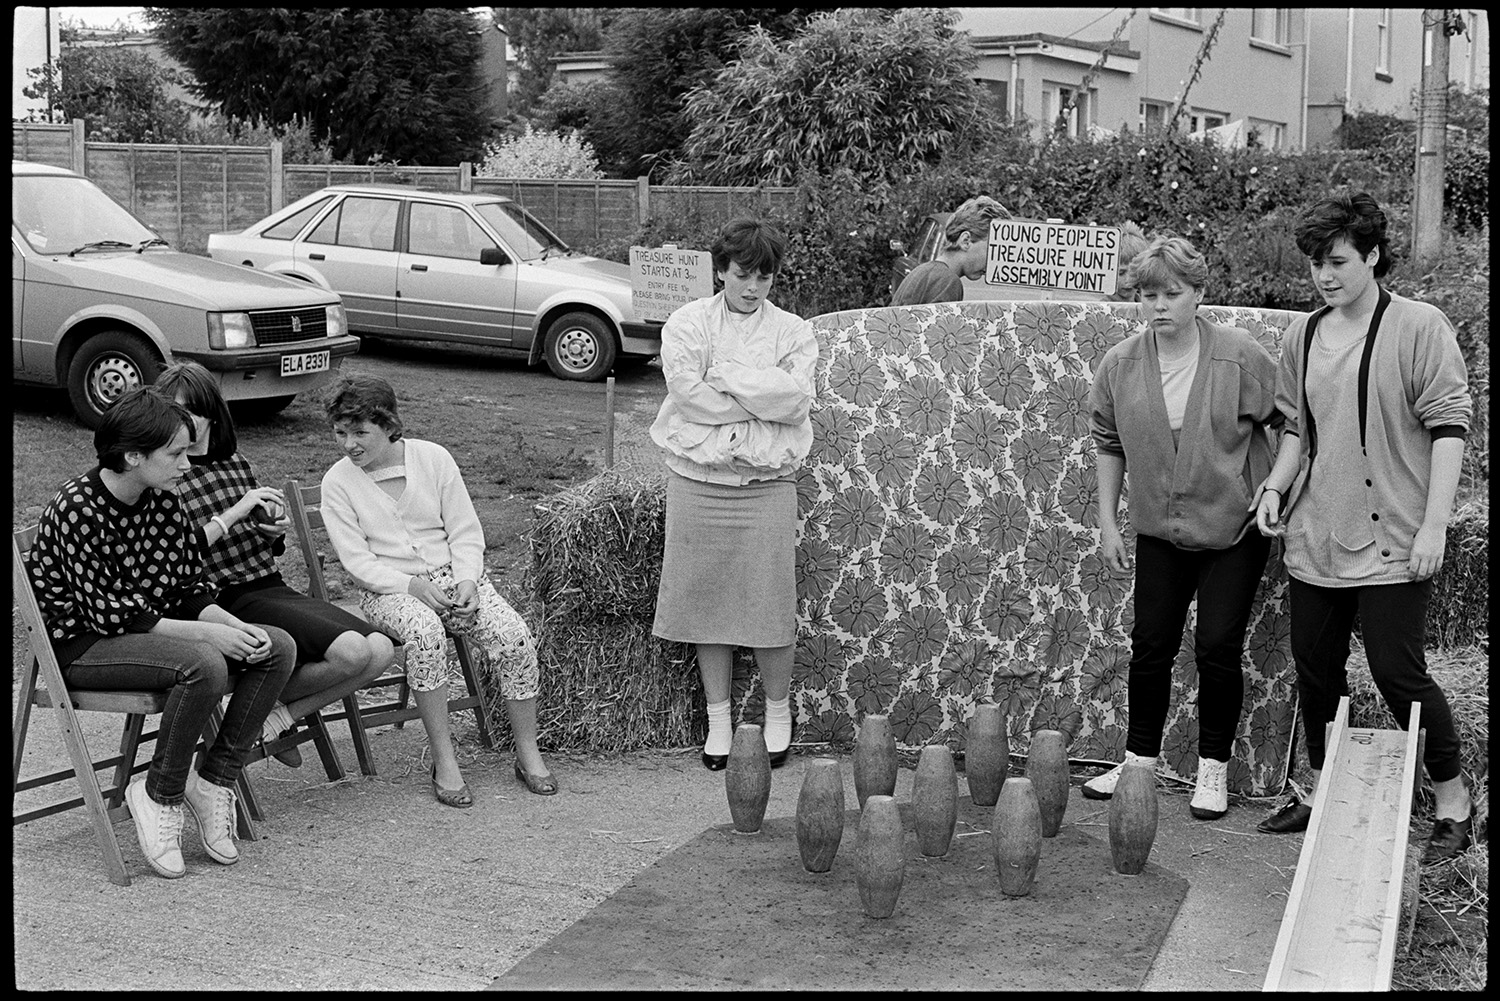 Flower show, displays of roses, cakes, vegetables, skittle alley.
[Teenage girls standing around the outdoor skittle alley at Dolton Flower Show. A mattress and straw bales are behind the skittles. Parked cars, signs for a Treasure Hunt, shrubs and houses are visible in the background.]